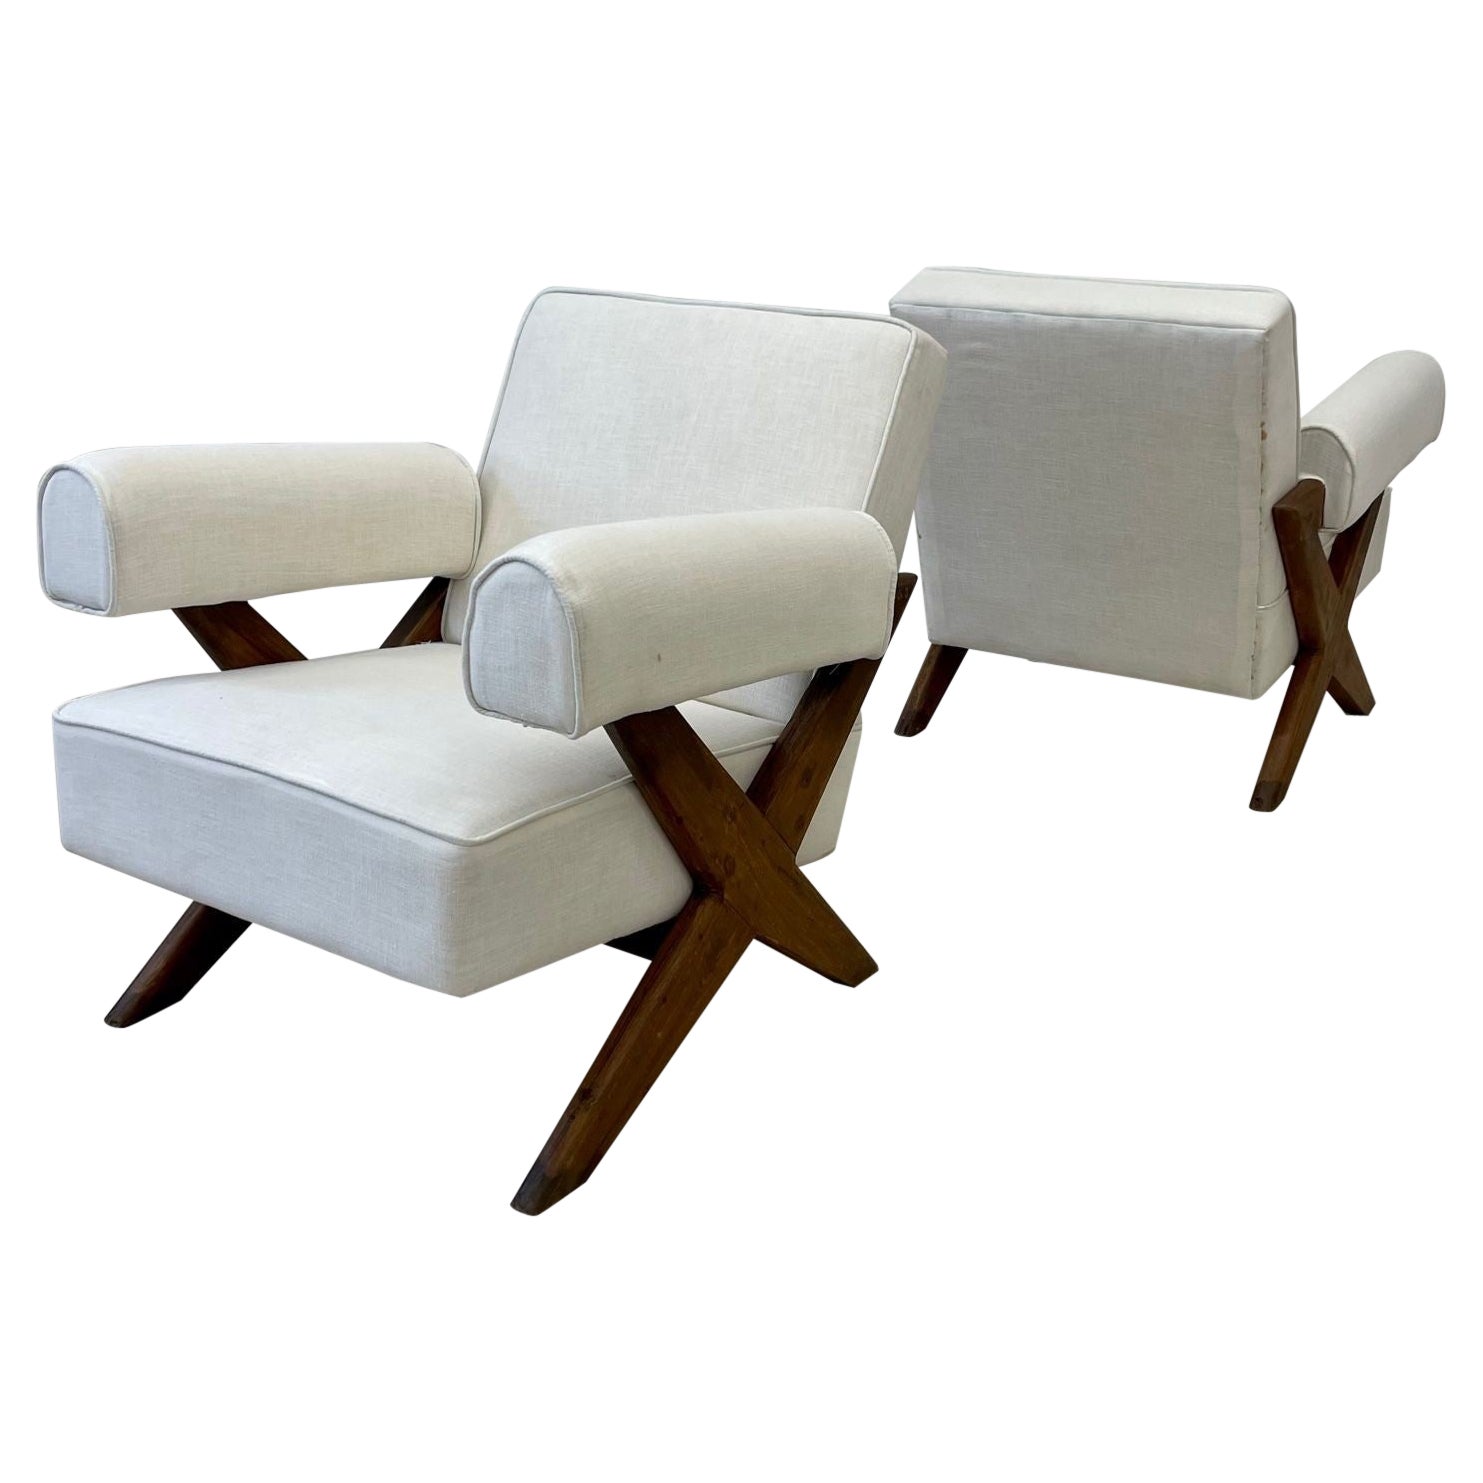 Pierre Jeanneret, French Mid-Century Modern, Lounge Chairs, Chandigarh, 1960s